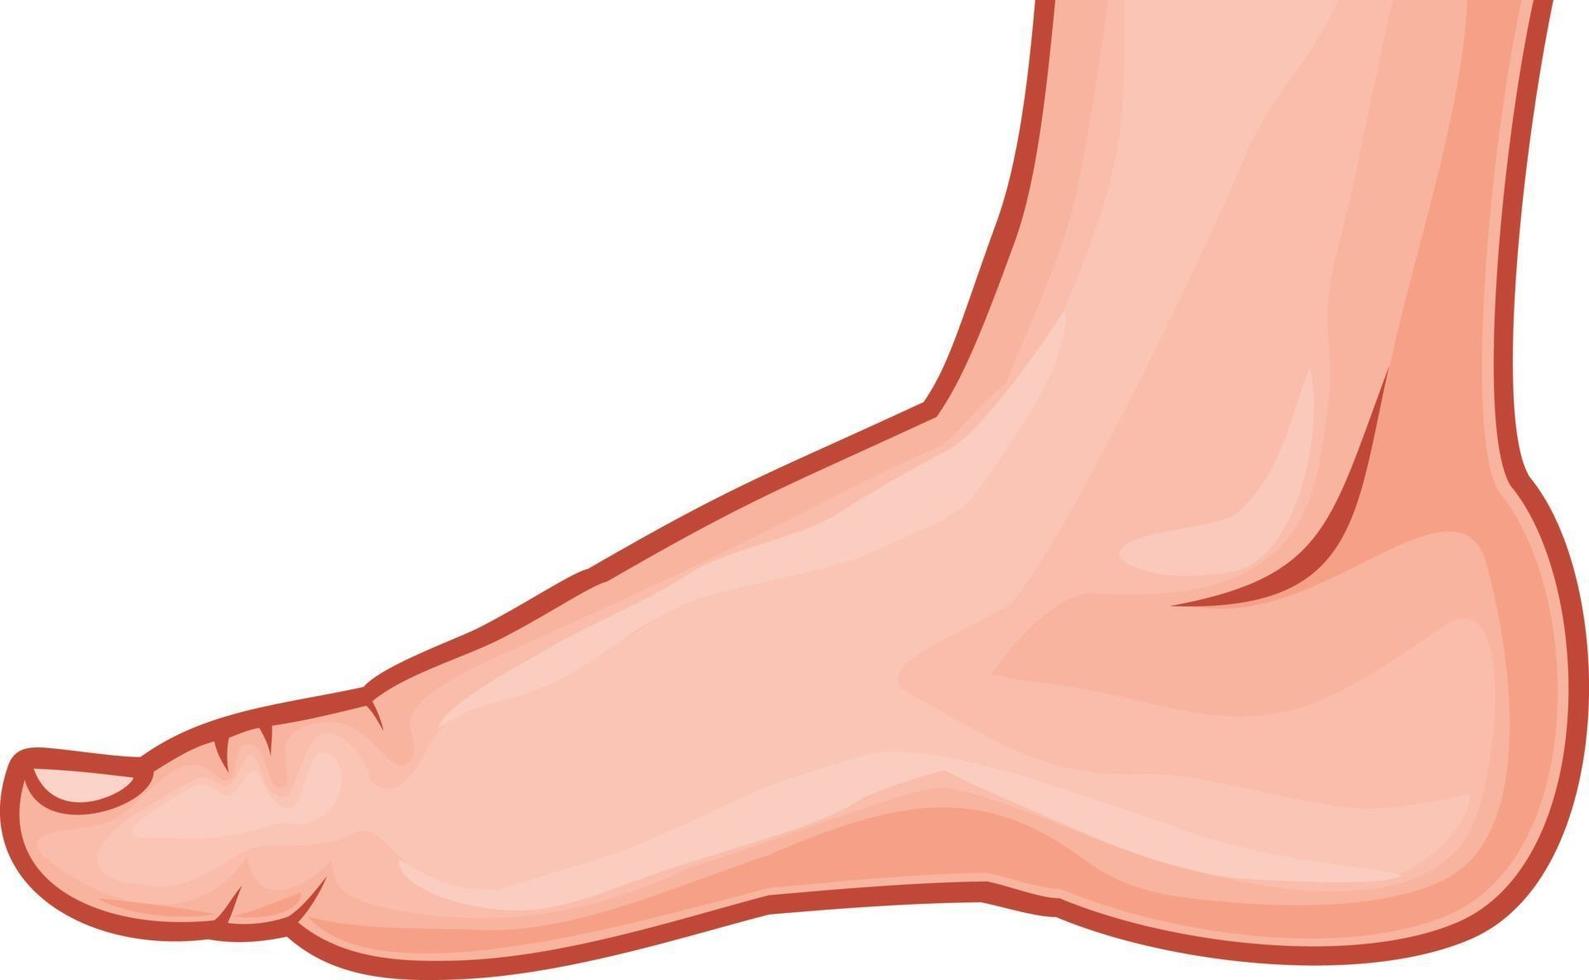 Illustration of a Human Foot Standing vector